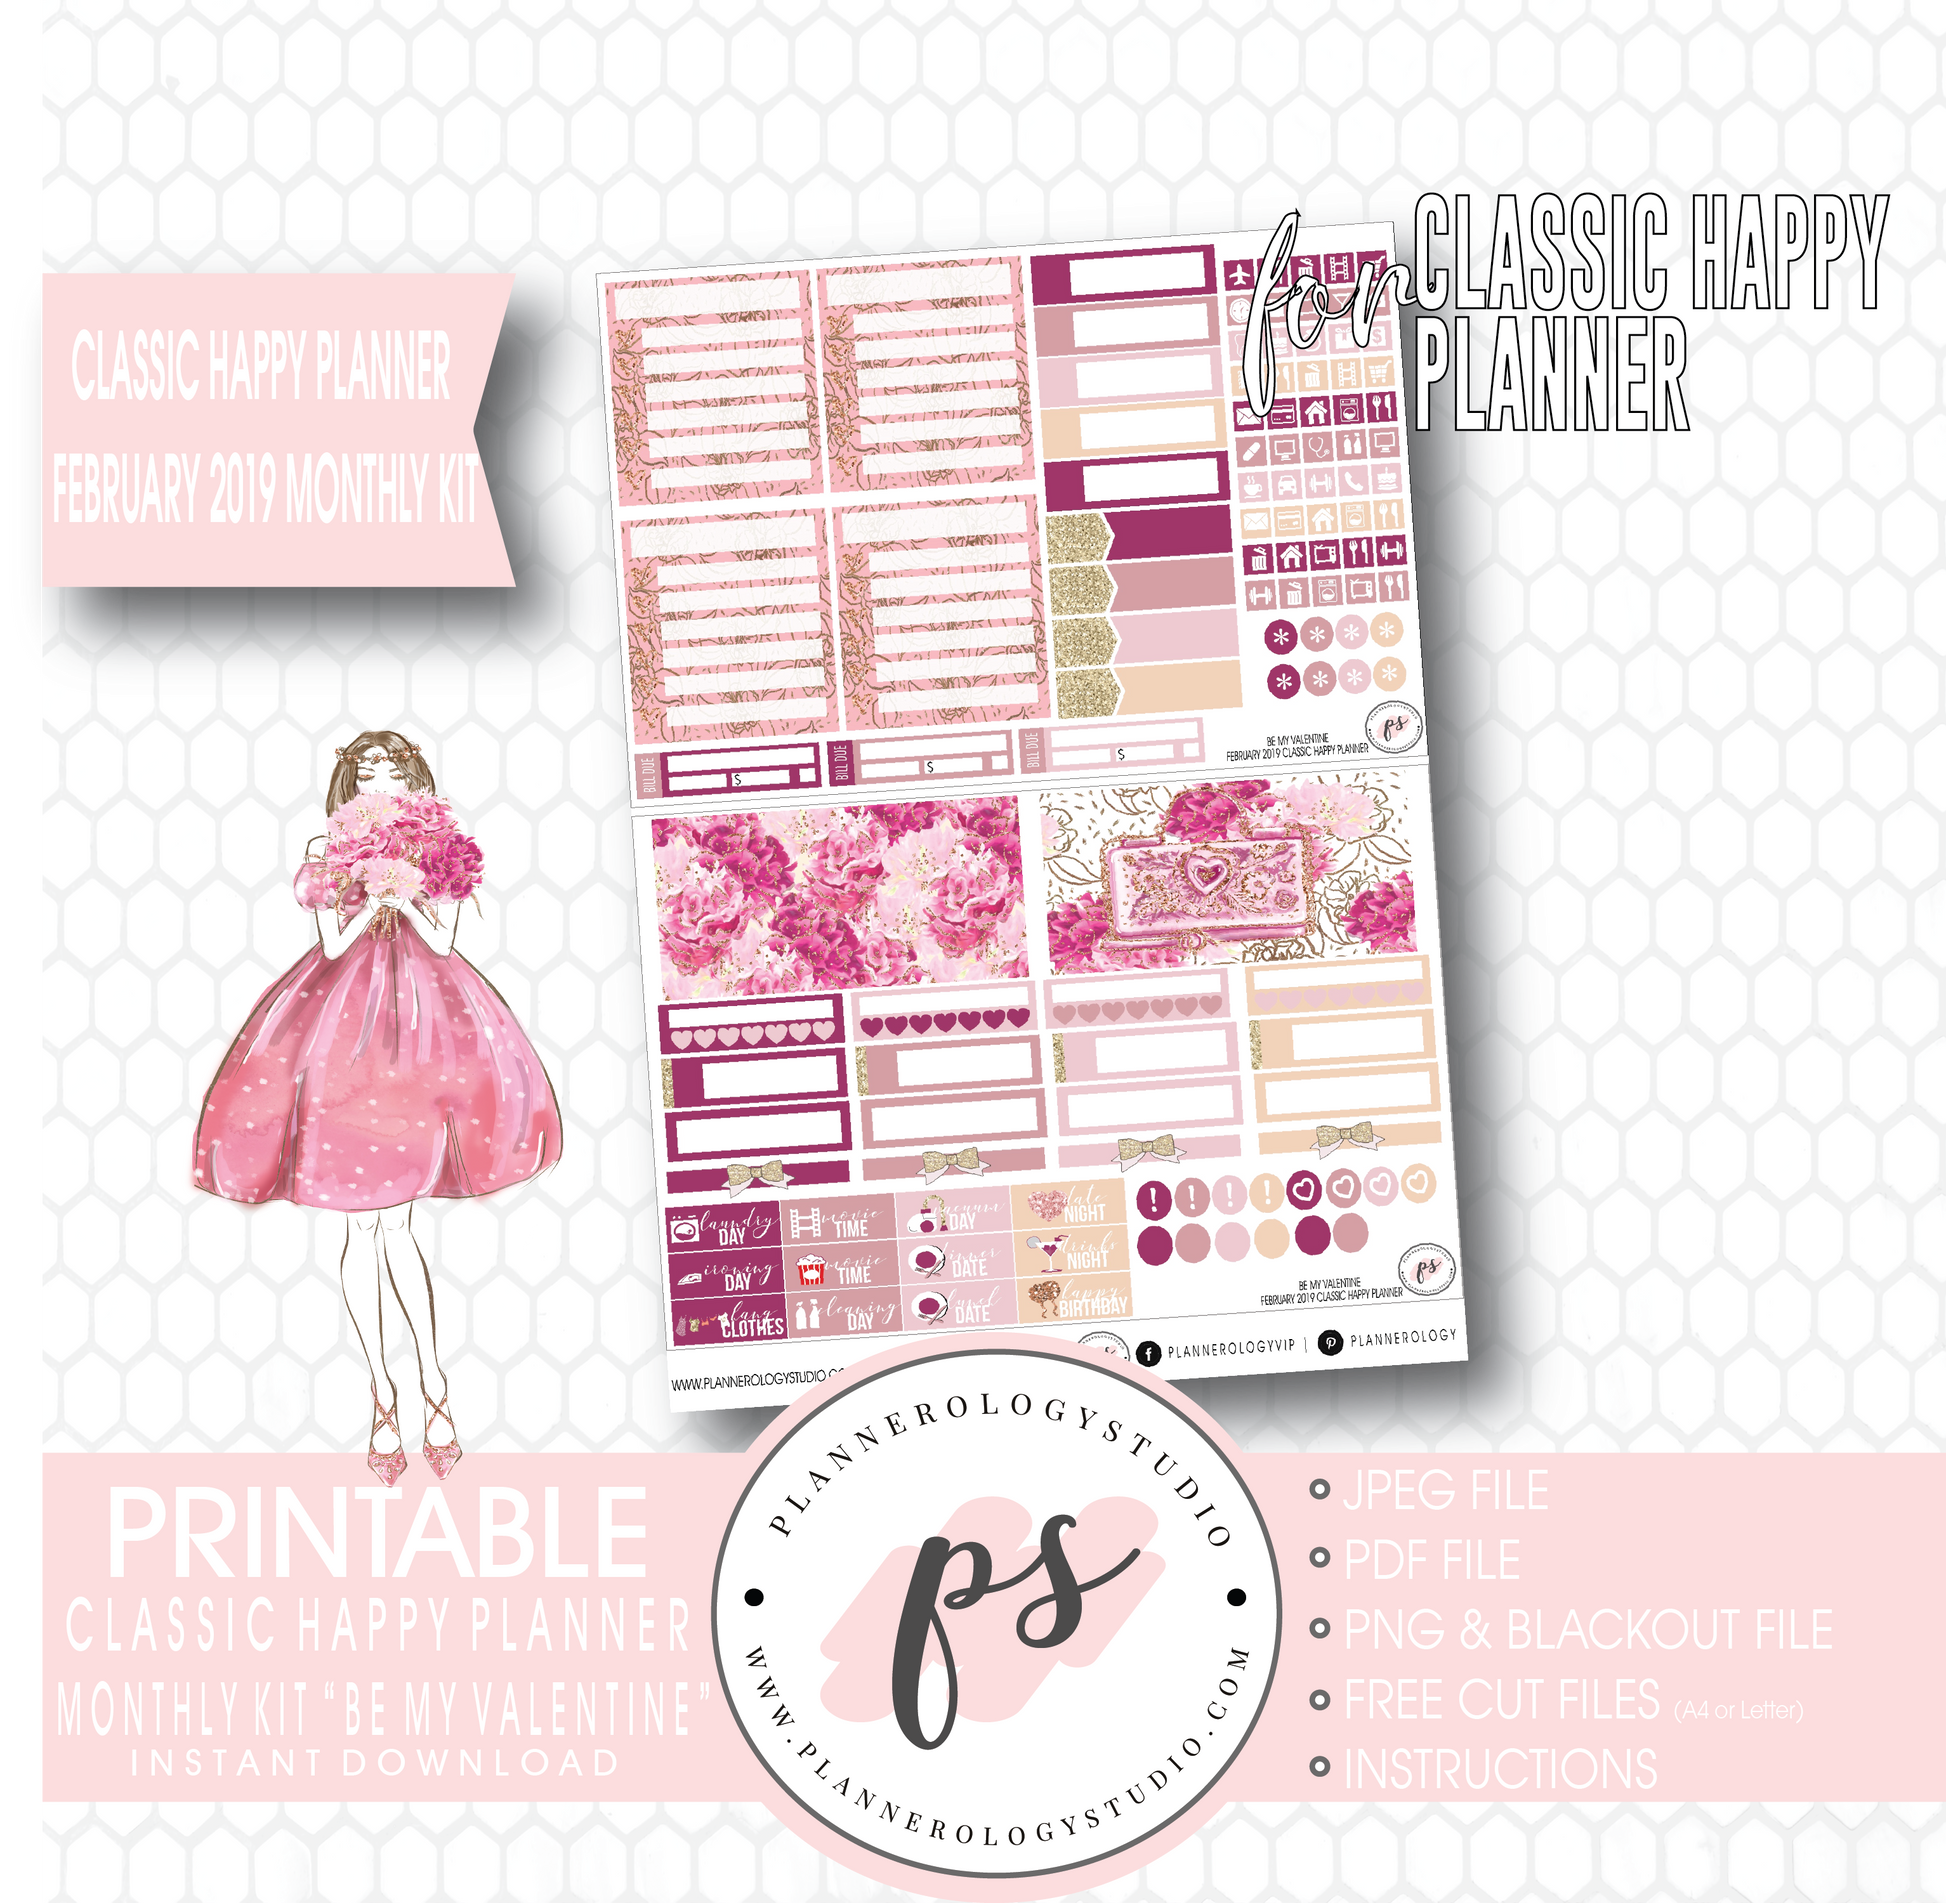 Be My Valentine February 2019 Monthly View Kit Digital Printable Planner Stickers (for use with Classic Happy Planner) - Plannerologystudio